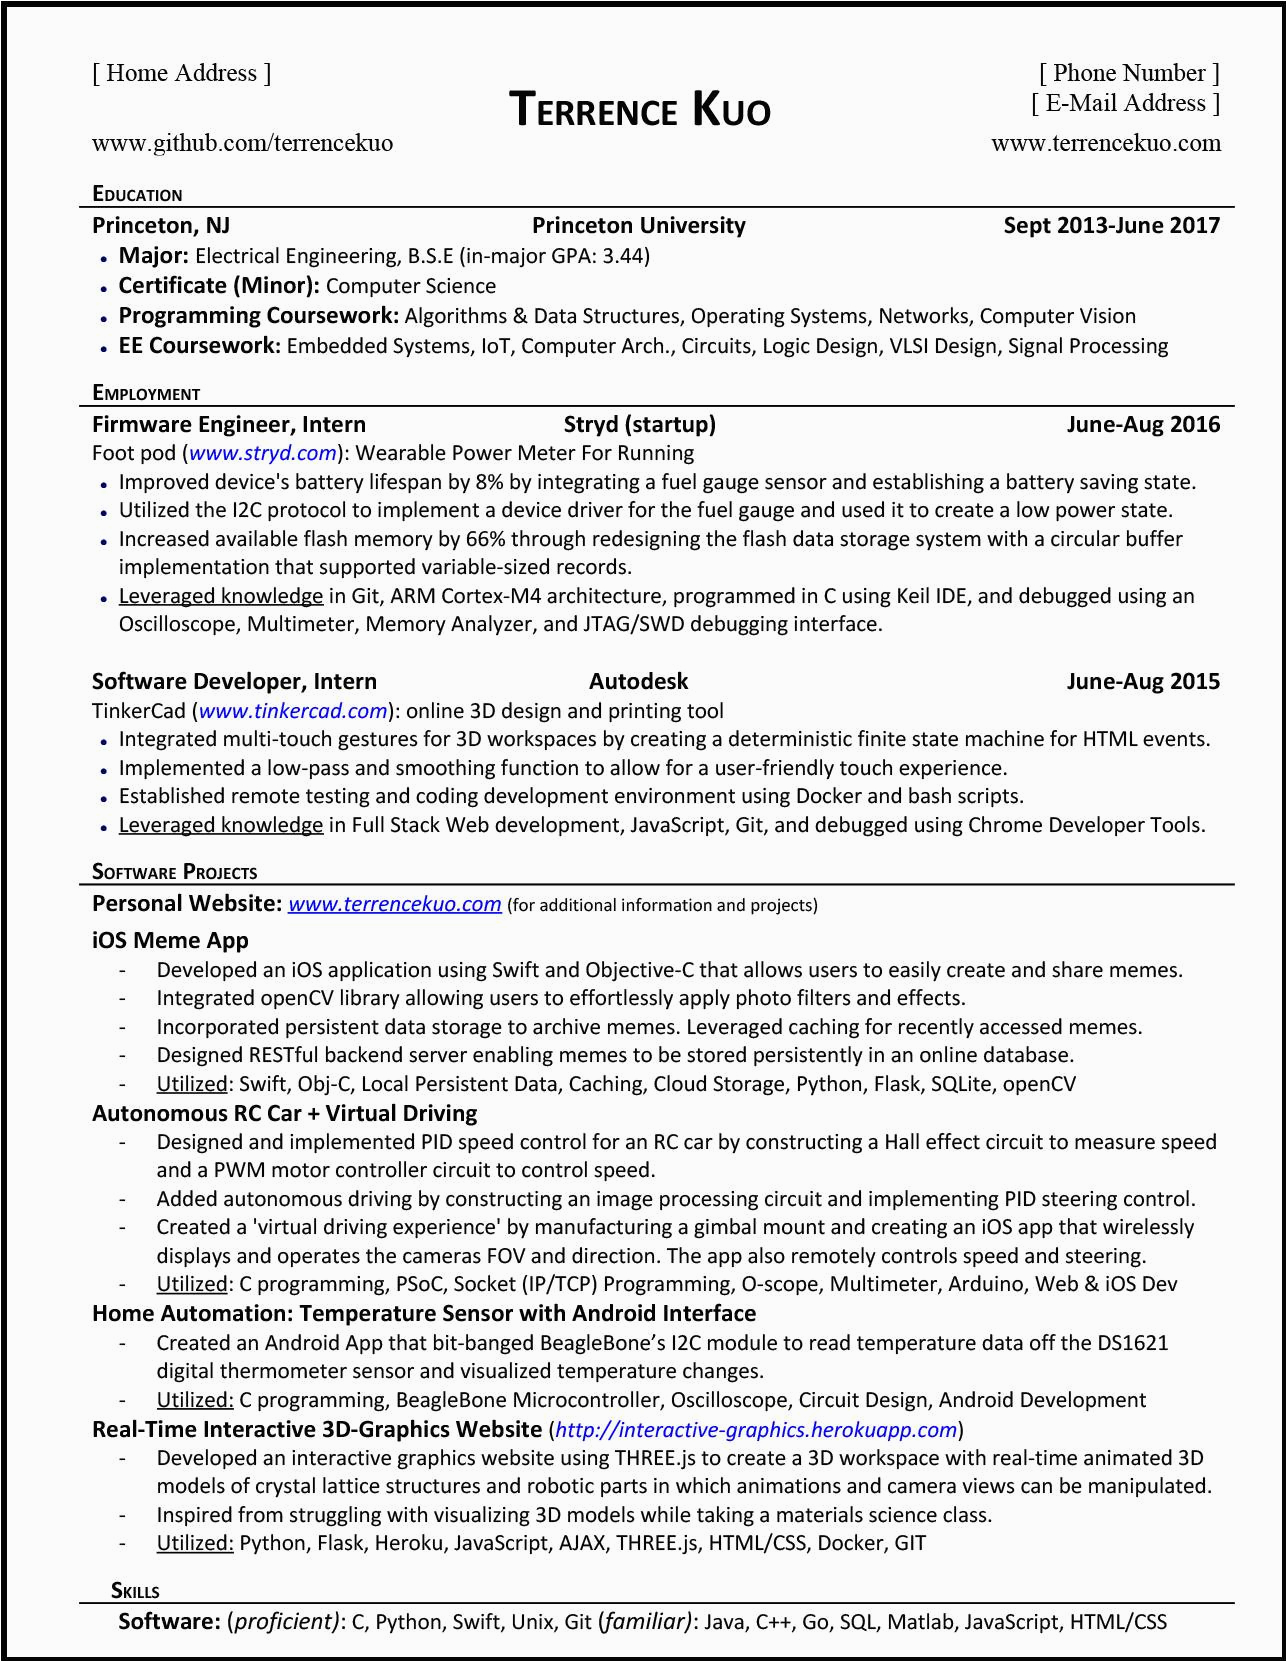 Software Project Description In Resume Sample How to Write A Killer software Engineering Résumé